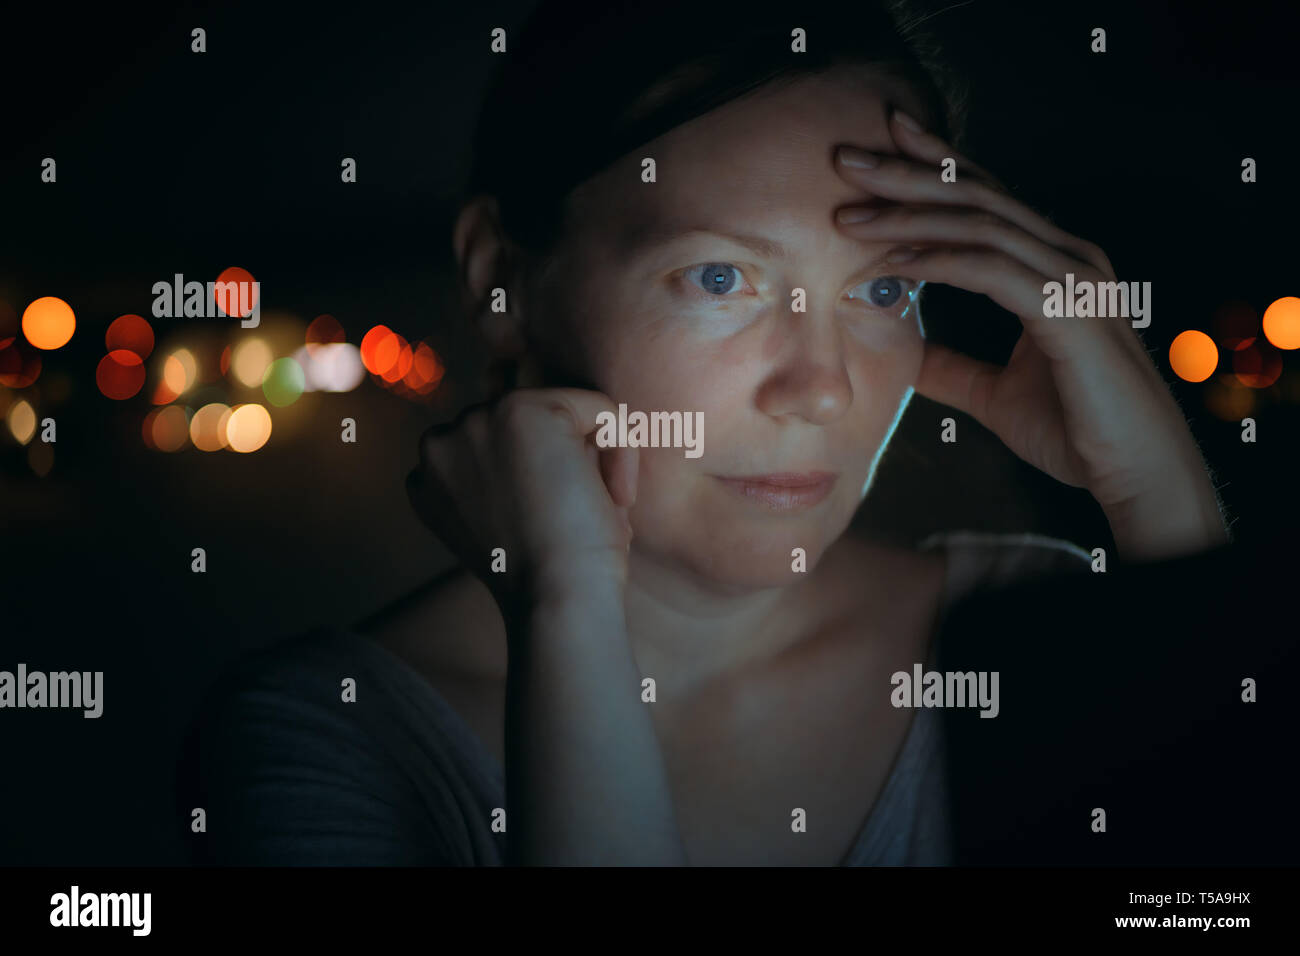 Low key portrait of tired woman looking at laptop computer screen exposed to the effect of technology blue light that impacts on sleep and circadian r Stock Photo